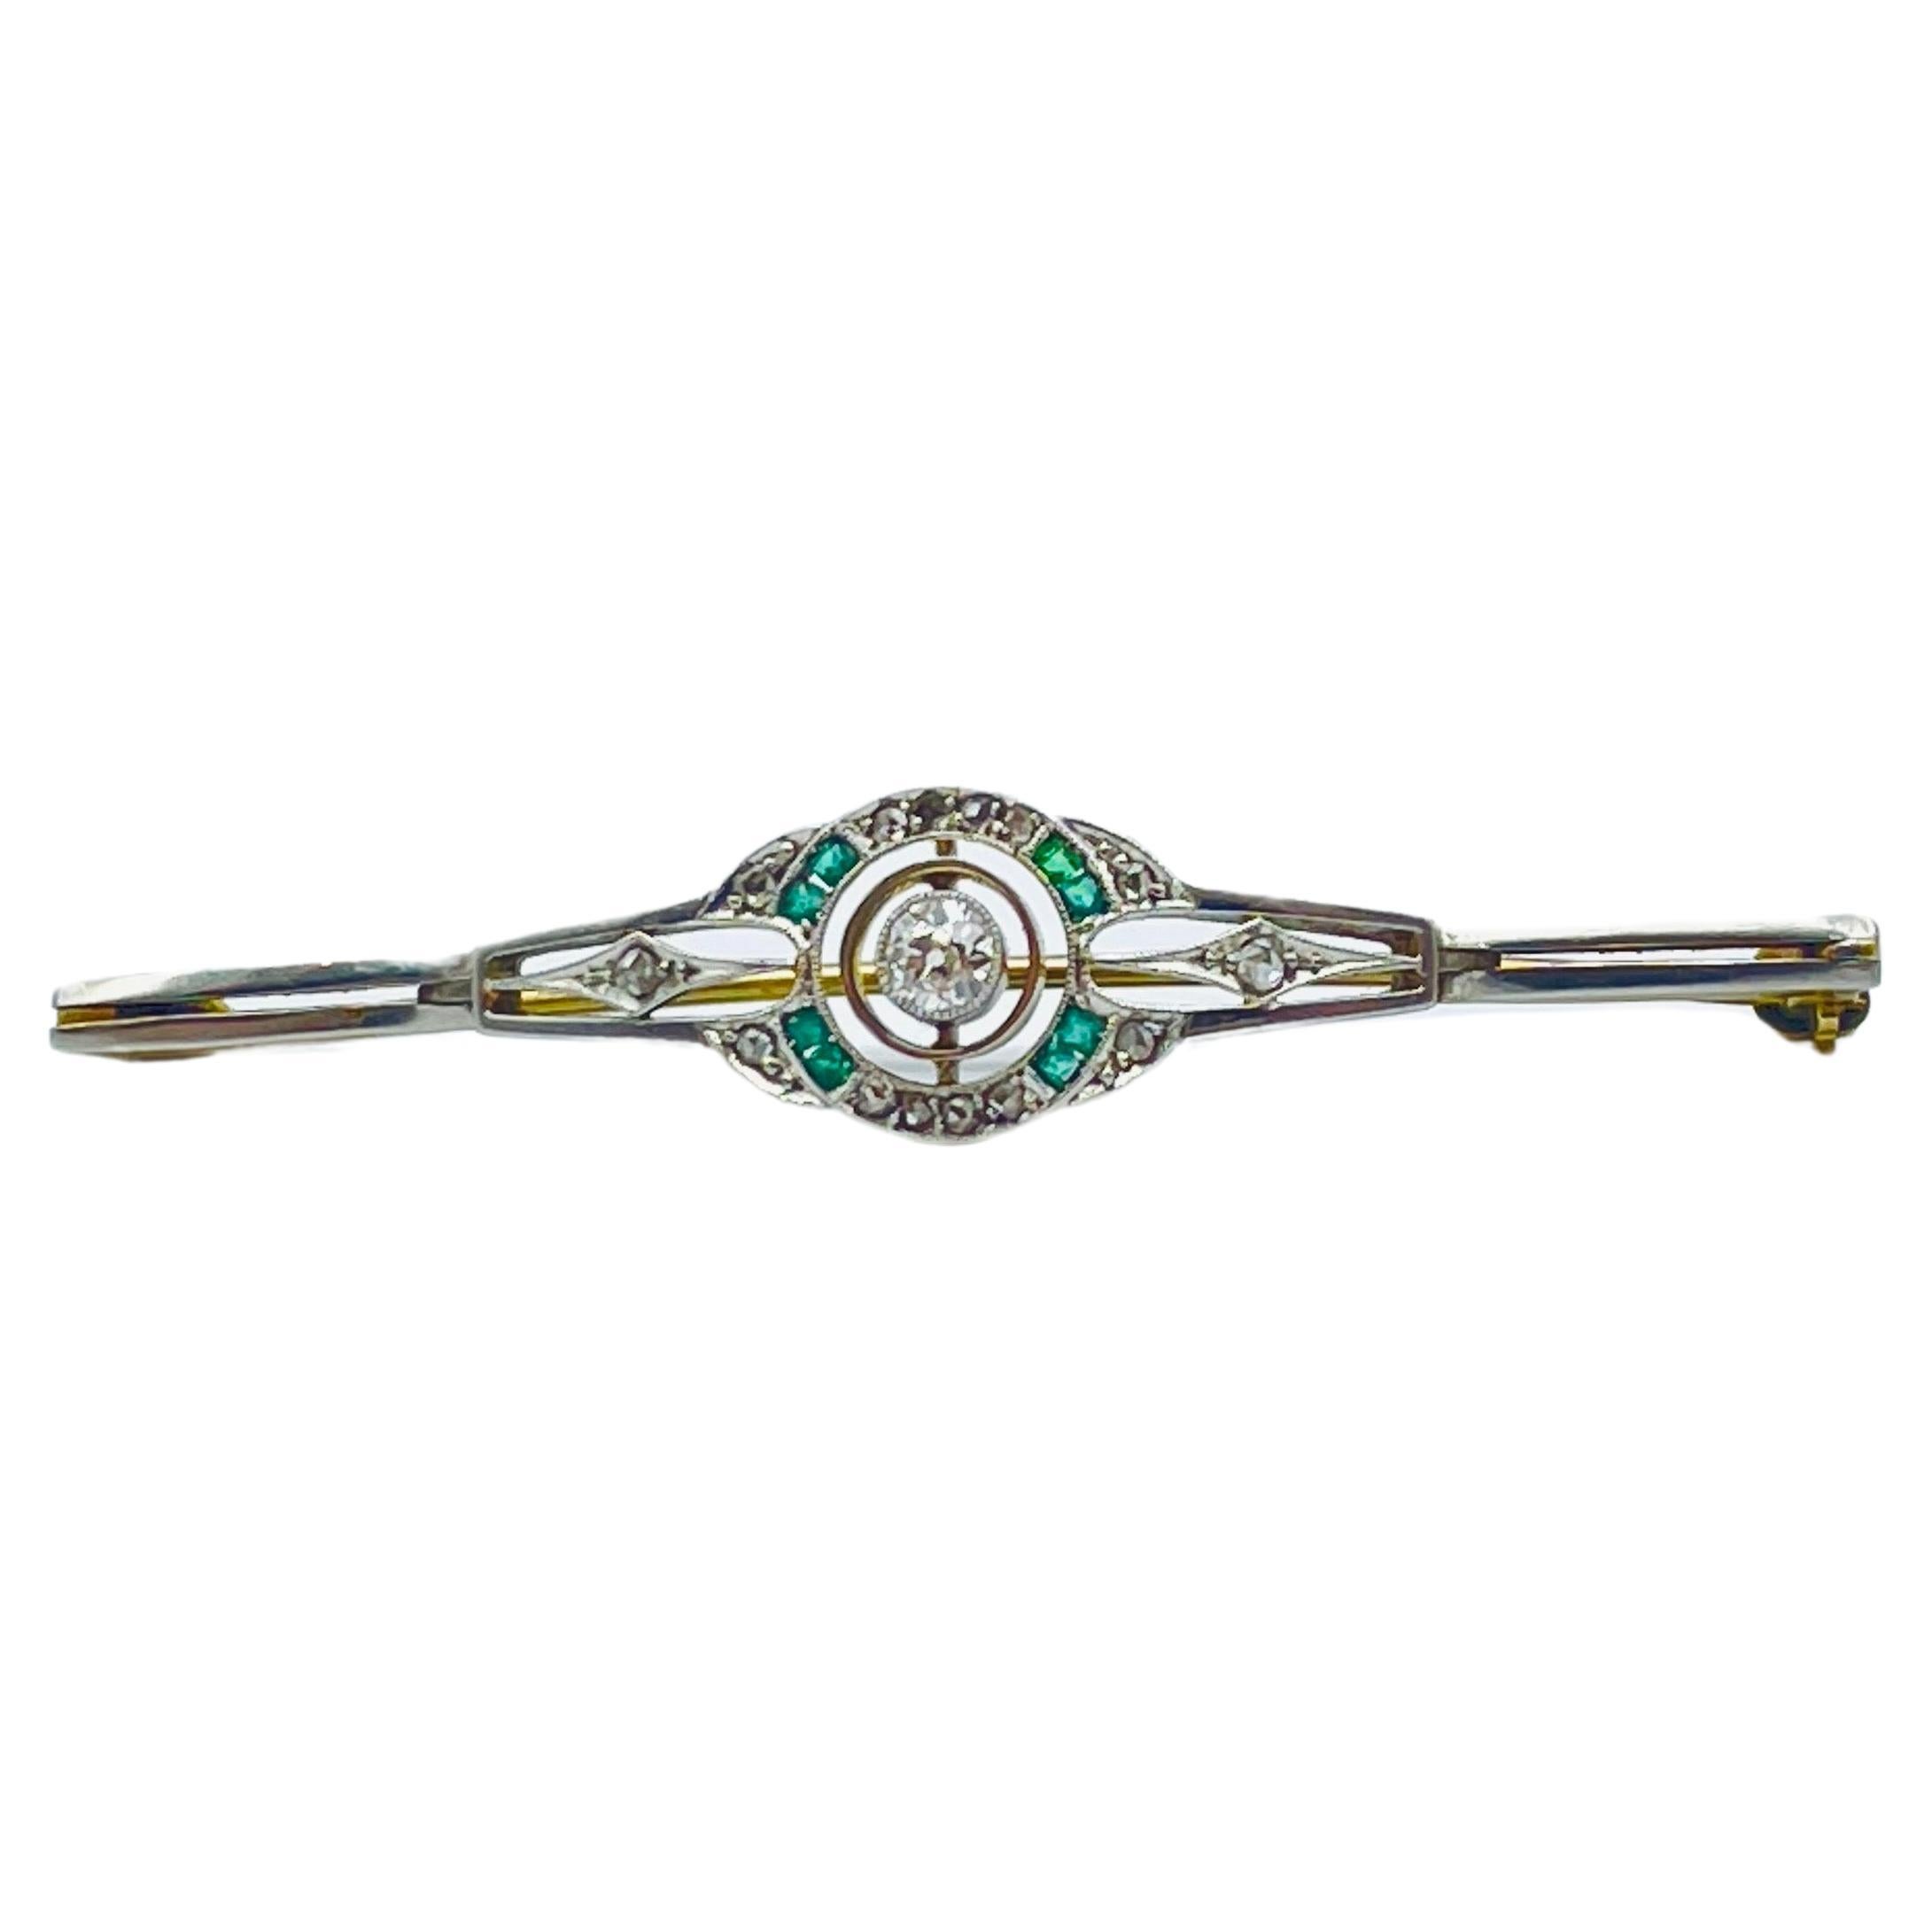 This enchanting Art Deco brooch is a masterpiece that seamlessly combines the rich warmth of yellow gold with the timeless elegance of white gold in a captivating bicolor embrace. It represents the pinnacle of craftsmanship, where every detail is